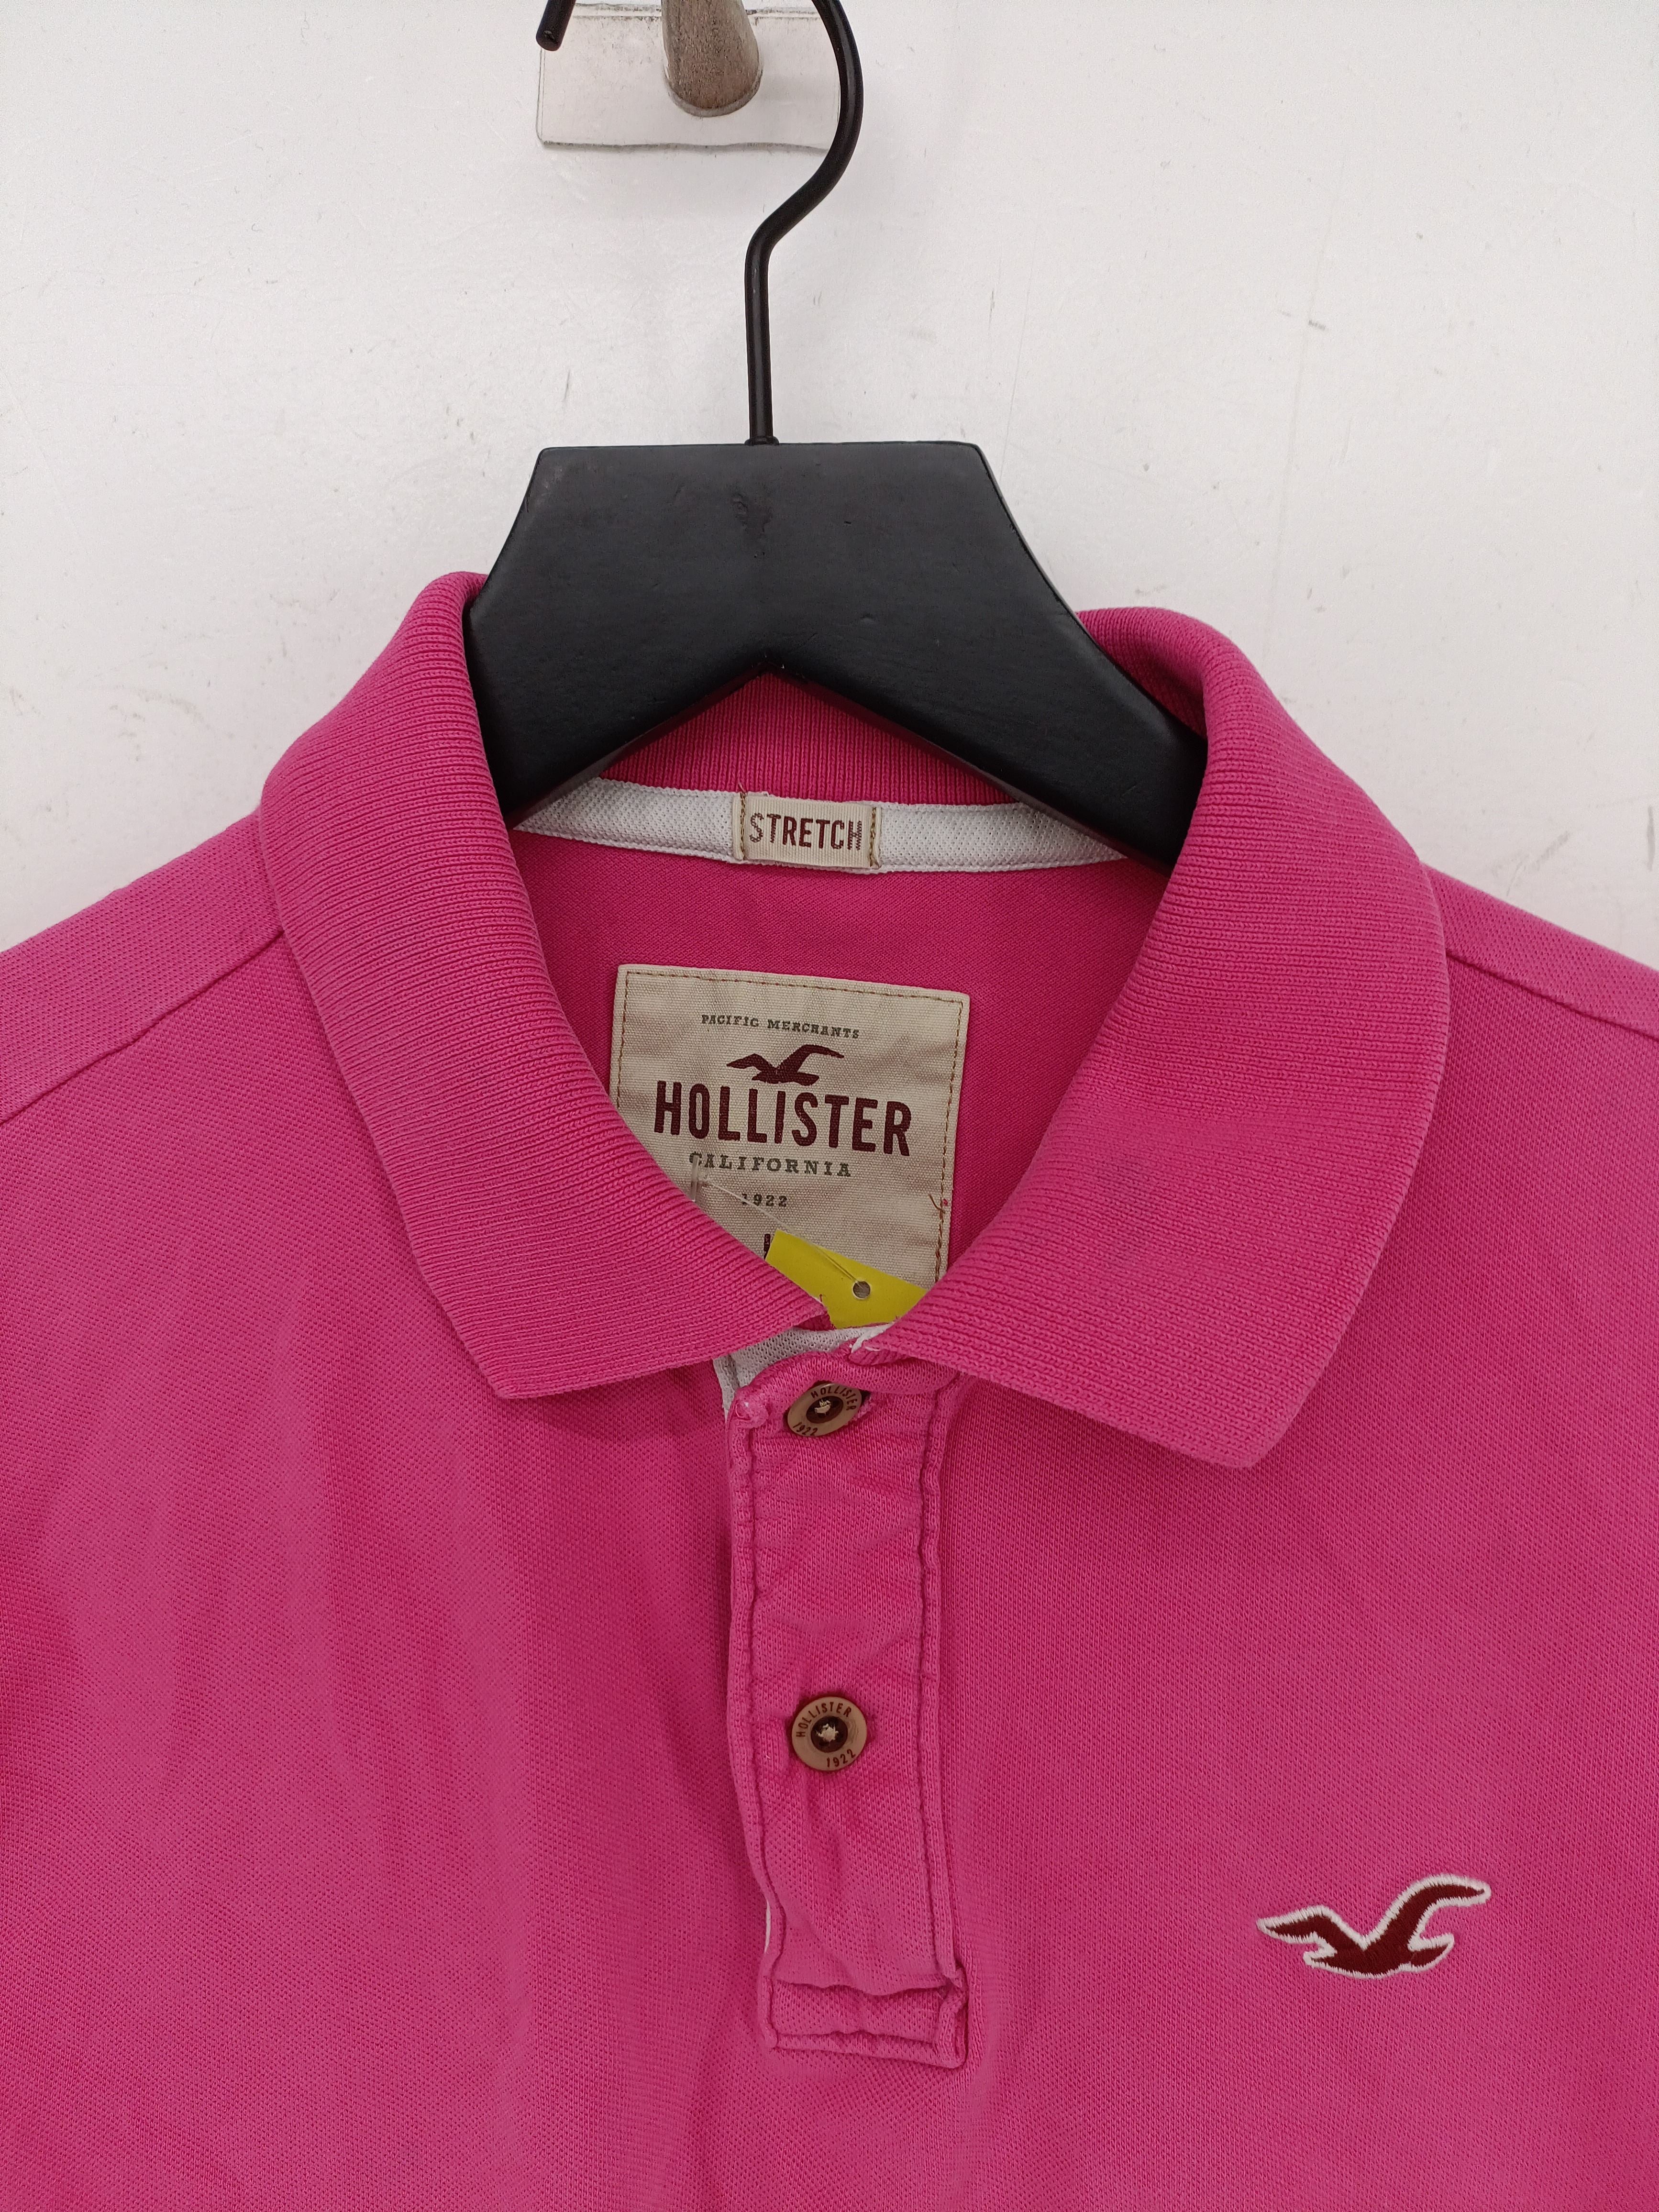 Hollister Women's Polo L Pink Cotton with Elastane